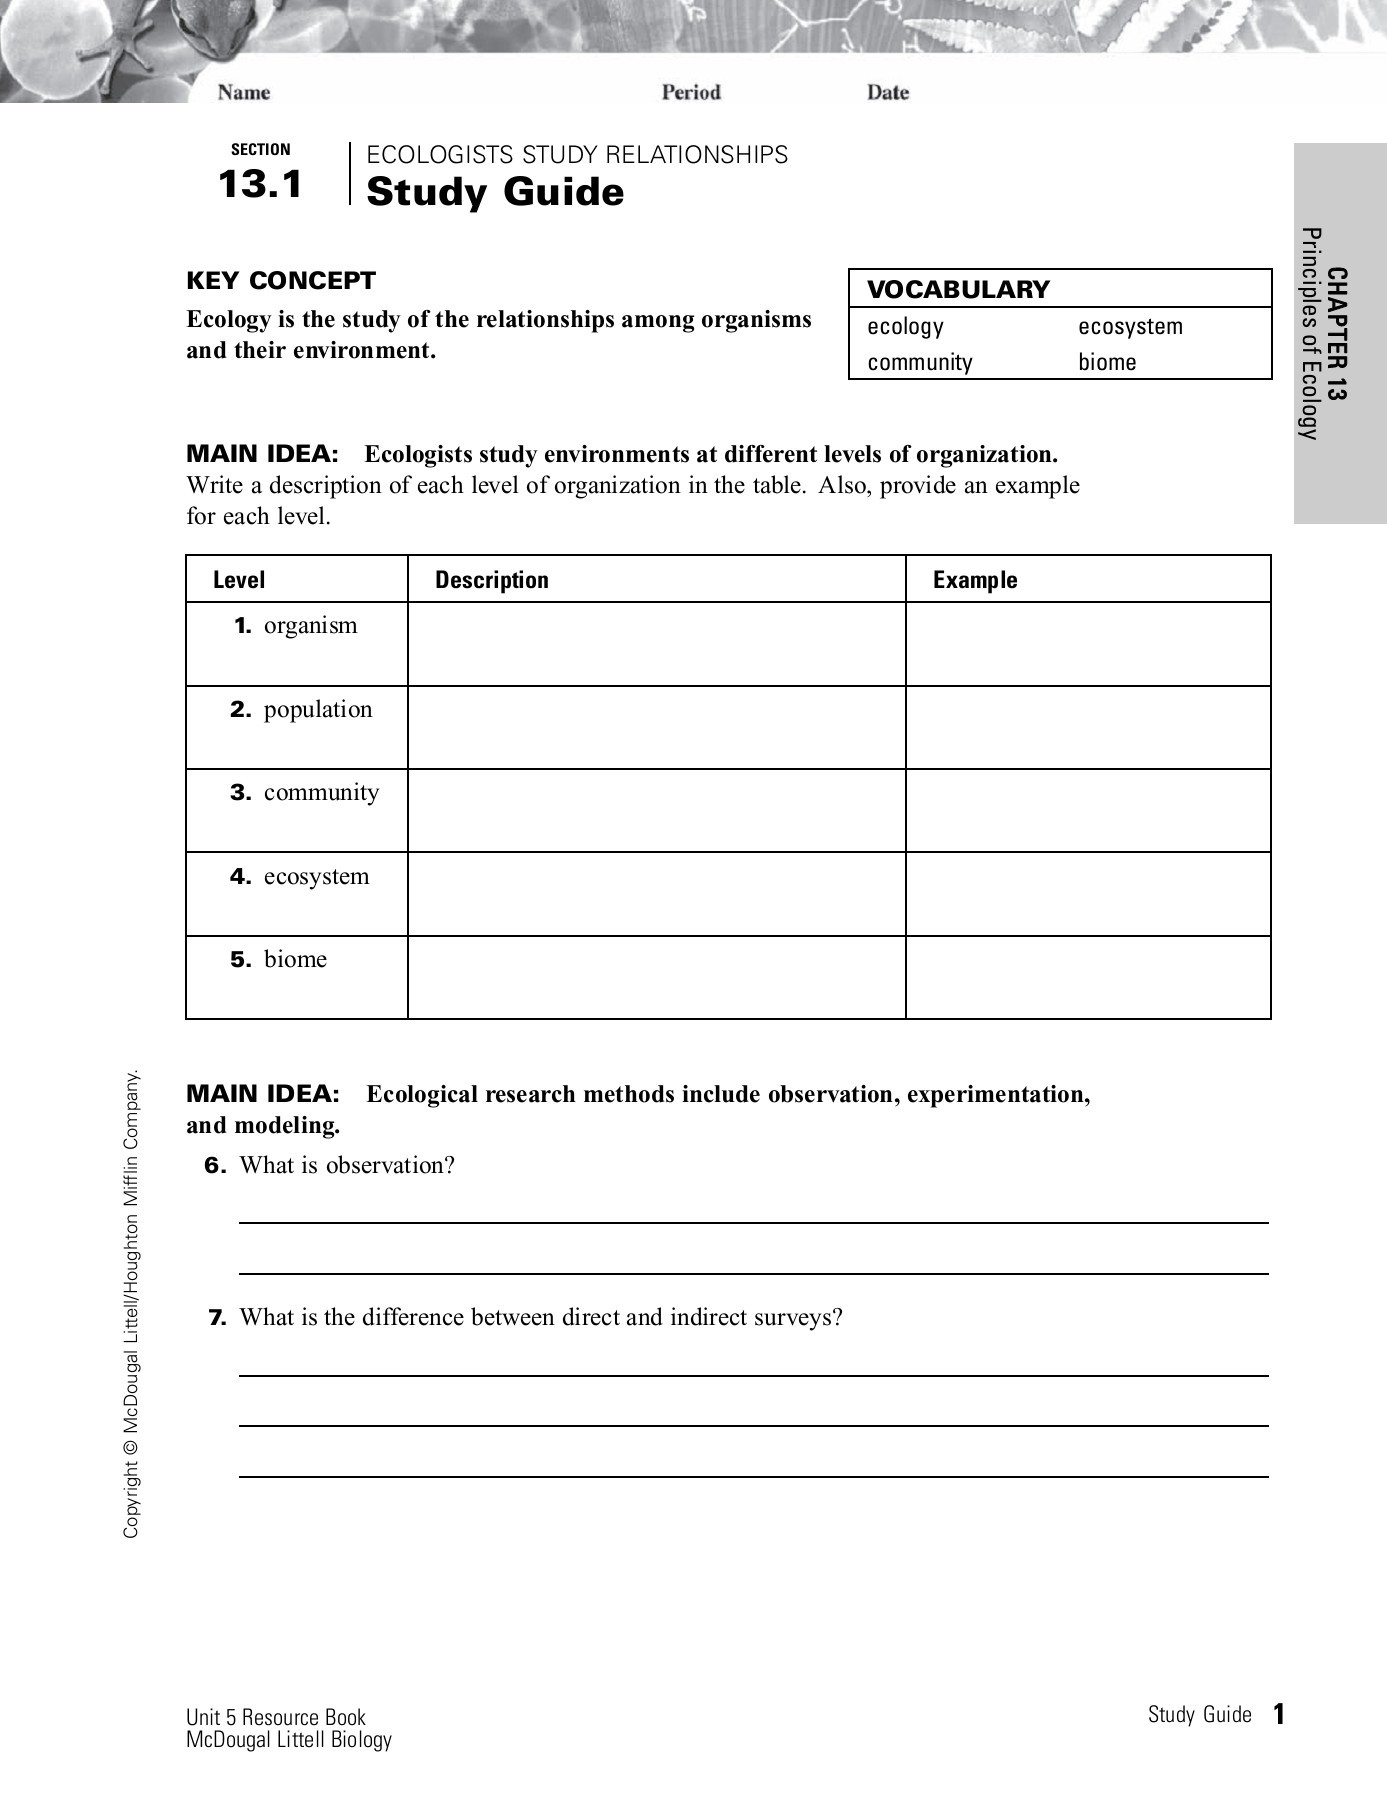 Principles Of Ecology Worksheet Answers Section Ecologists Study Relationships 13 1 Study Guide